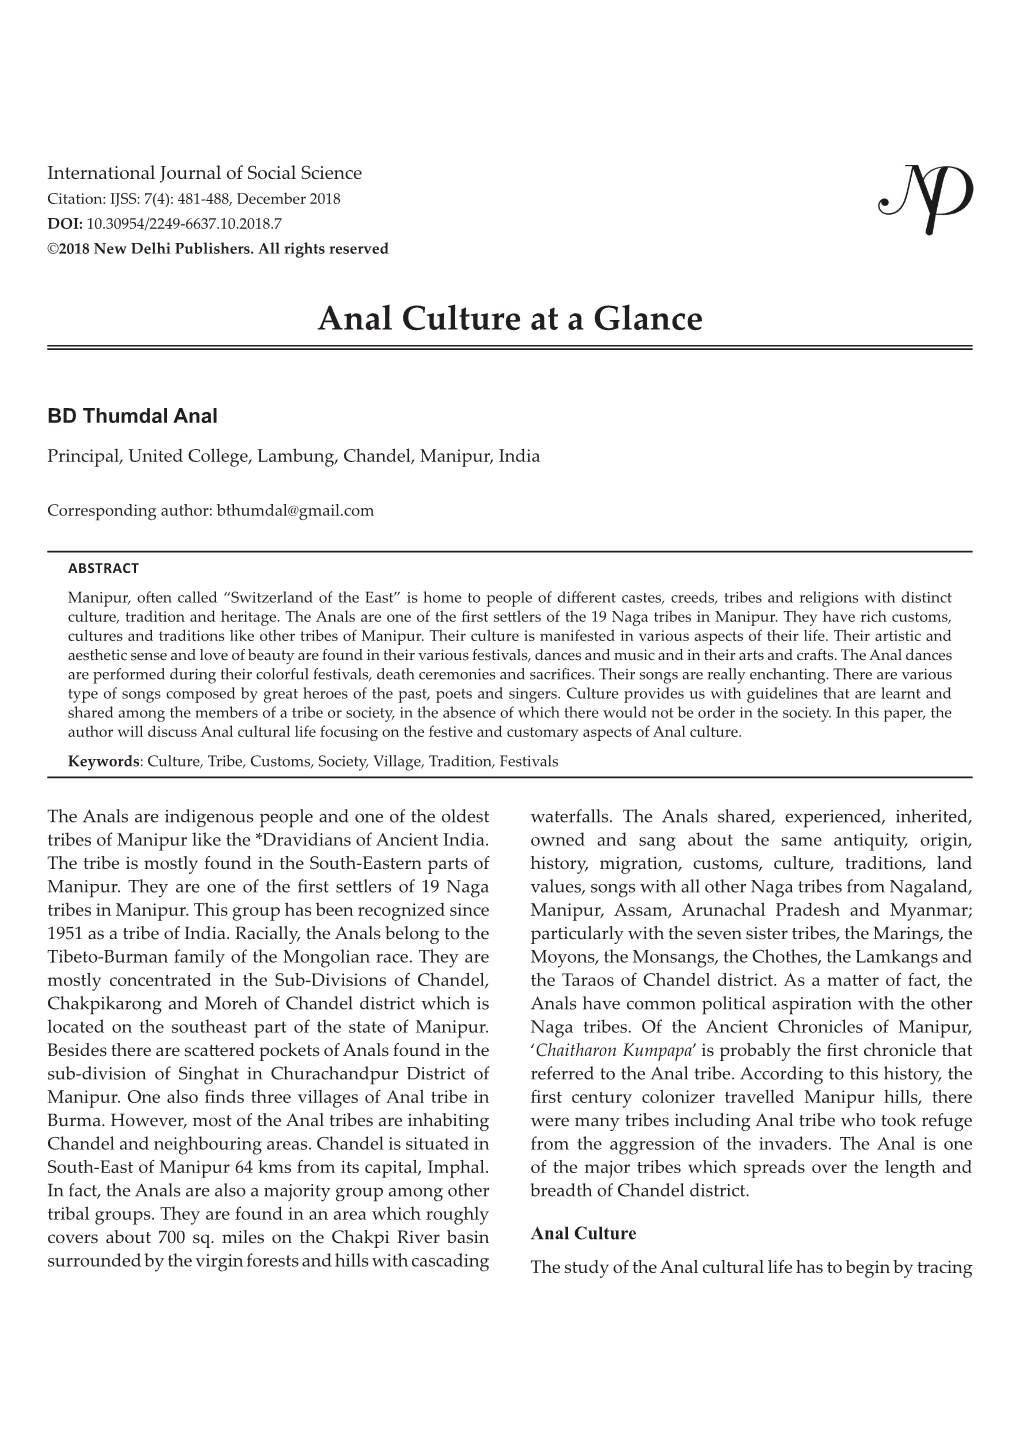 Anal Culture at a Glance